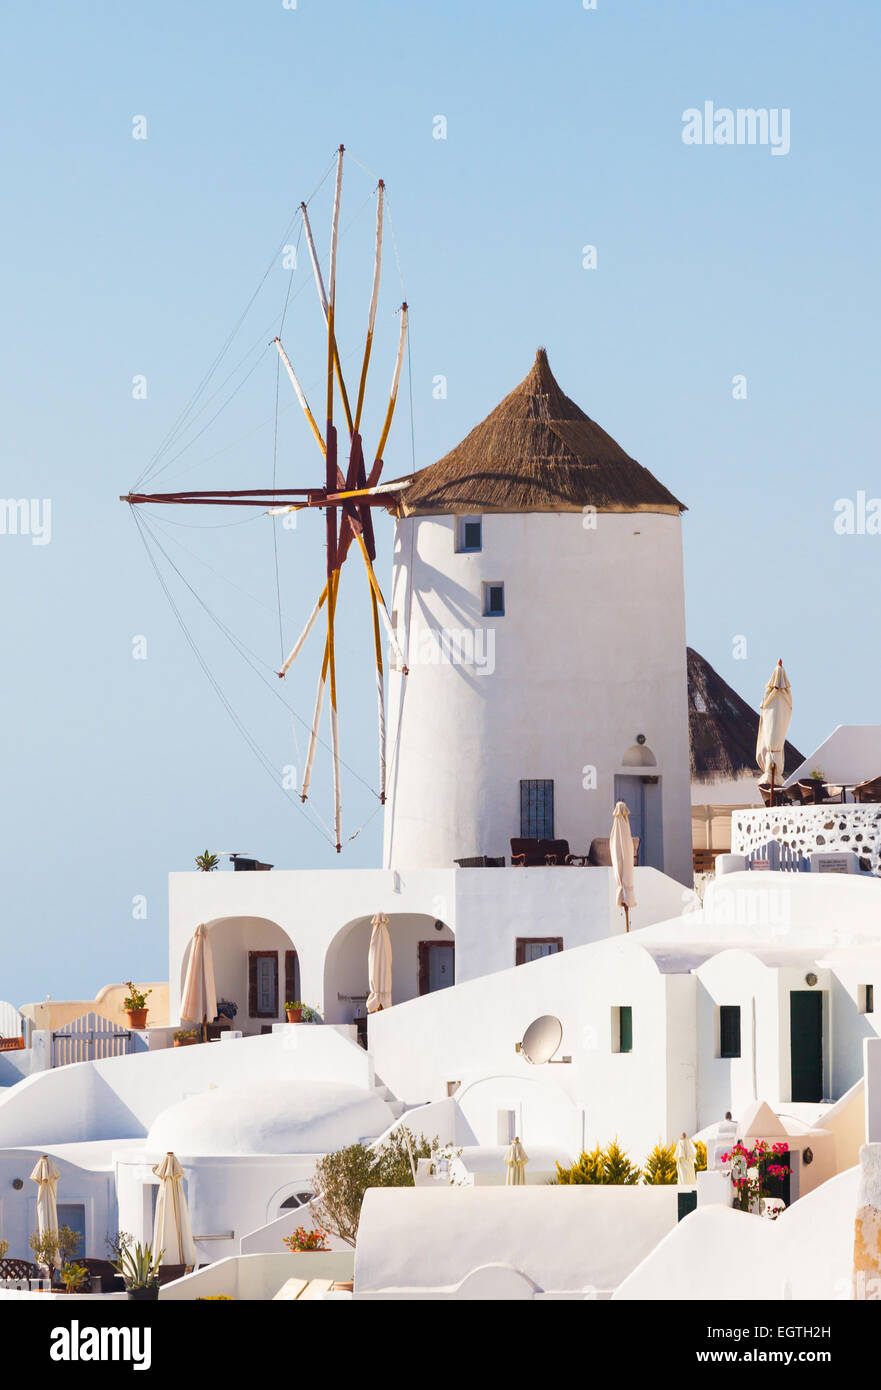 Windmill in Oia, Santorini. Oia is a village in the north west edge of the Santorini island with white houses. Stock Photo